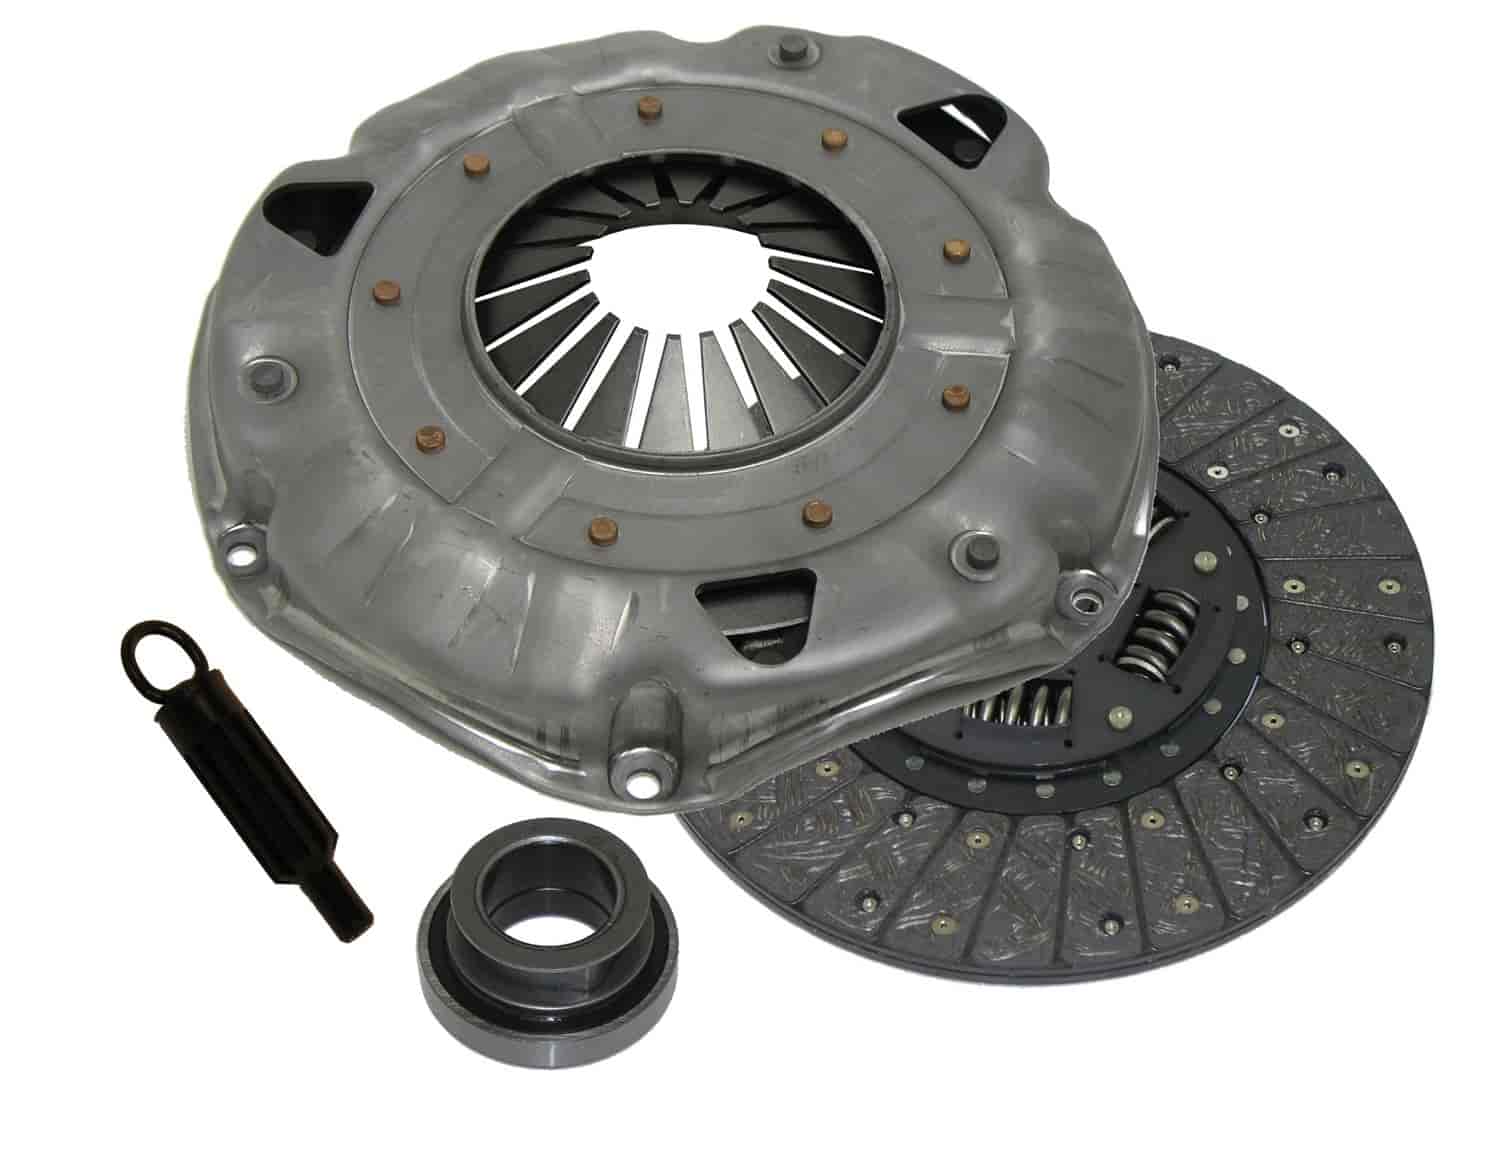 Premium OEM Replacement Clutch Kit 1988-95 GM Full-Size Truck/Van and S-Series Truck